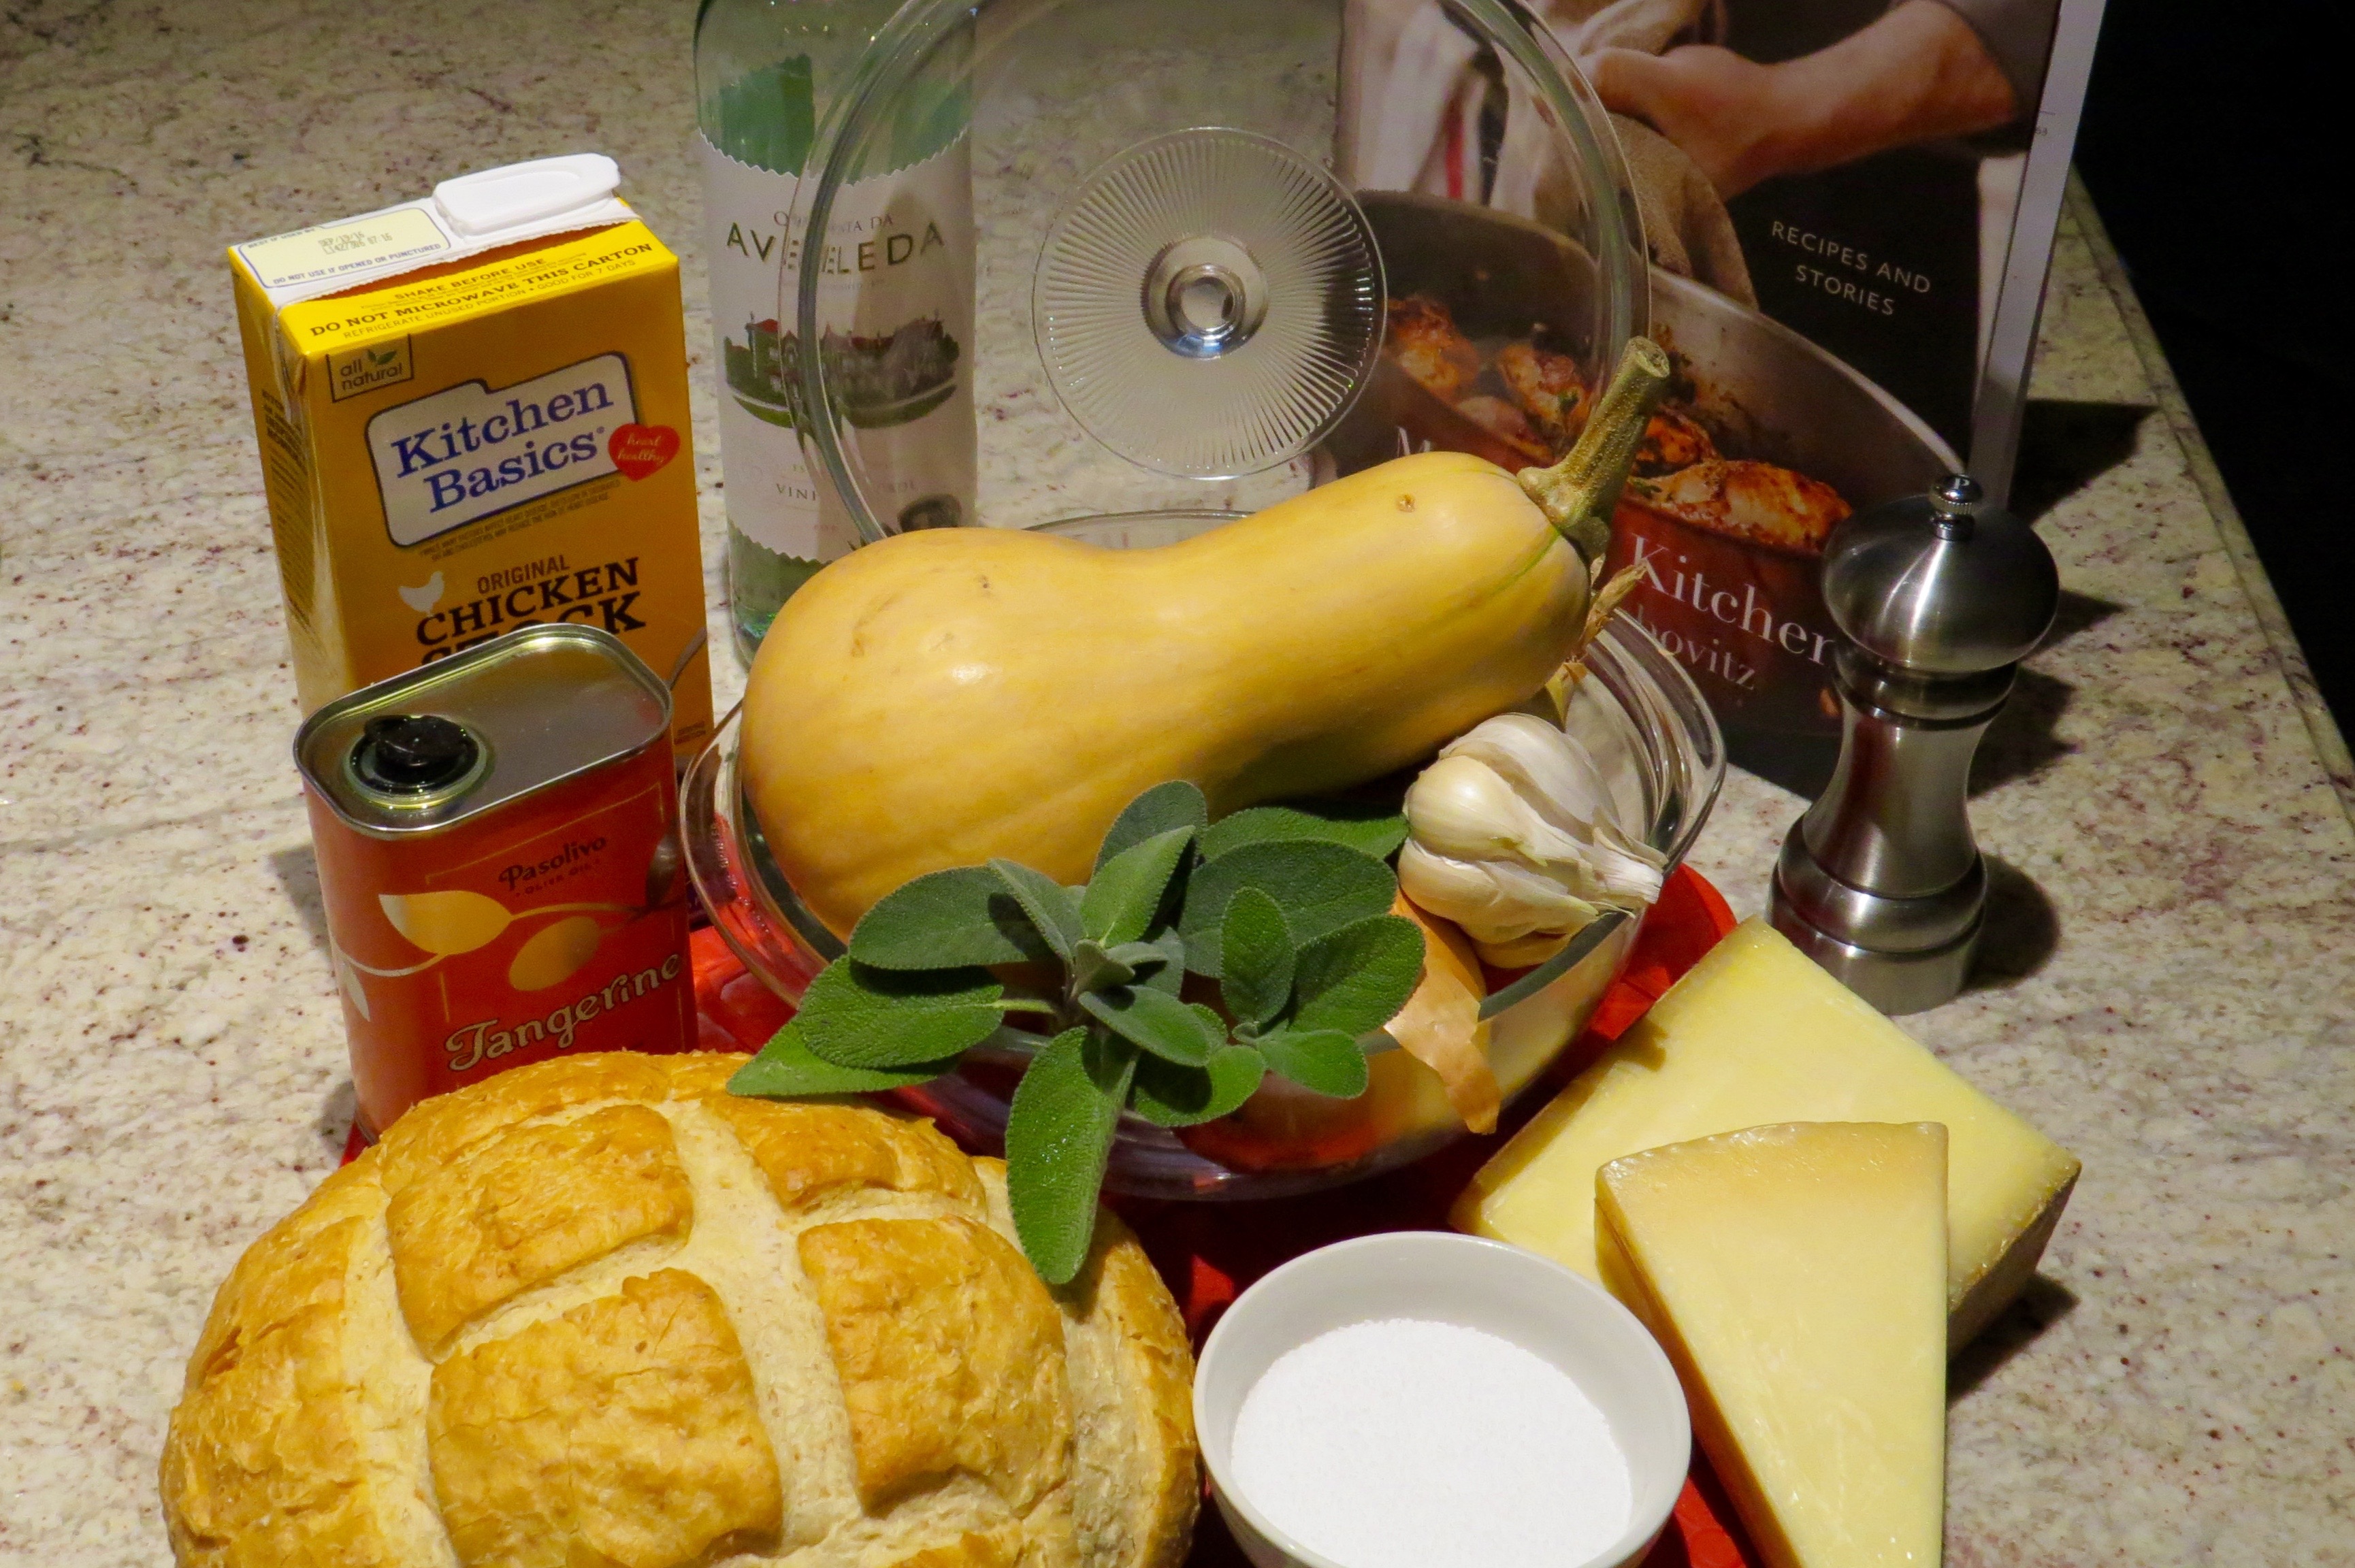 MISE en PLACE, THE INGREDIENTS NEEDED FOR THE PANADE